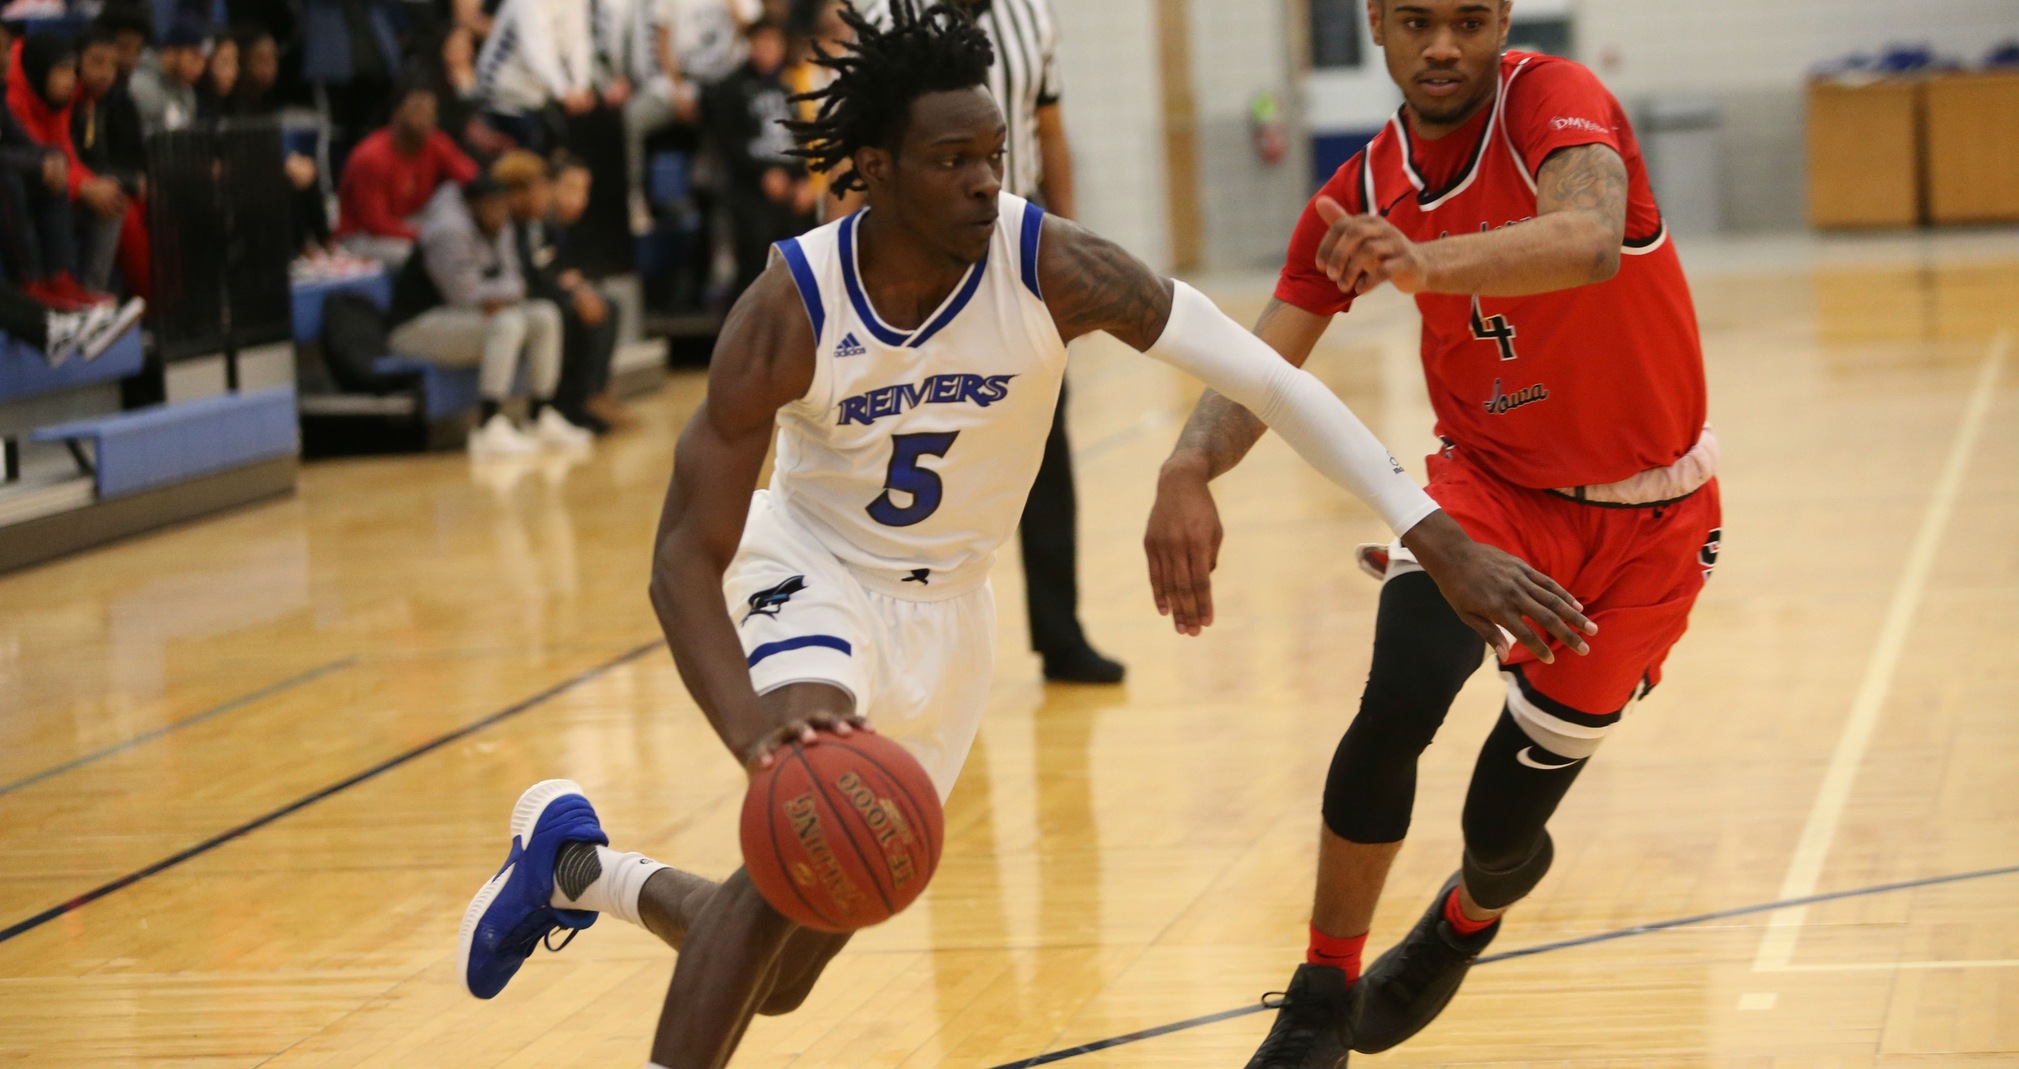 Travon Broadway collected his first double-double of the season (28pts-10rebs), as Iowa Western beat Cloud County (KS) for the second time this season.